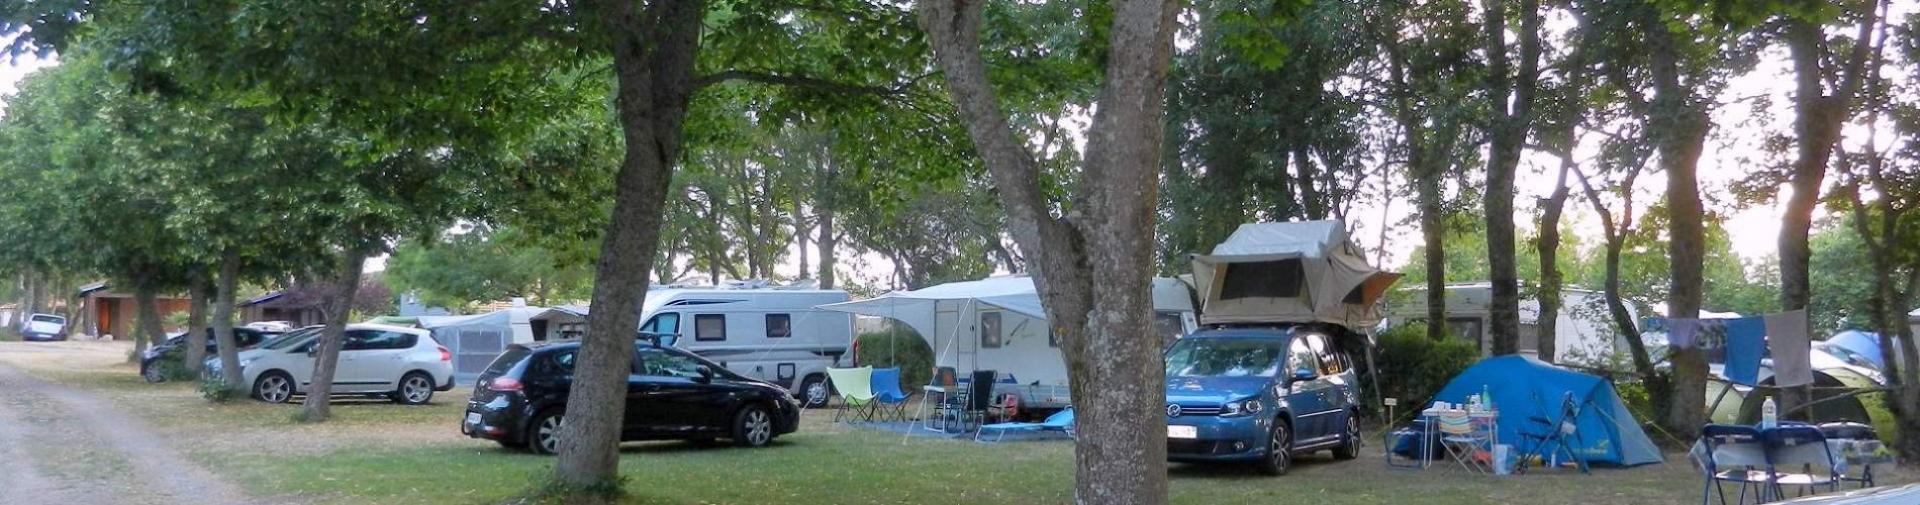 Camping Auvergne - camping auvergne emplacement ombrage